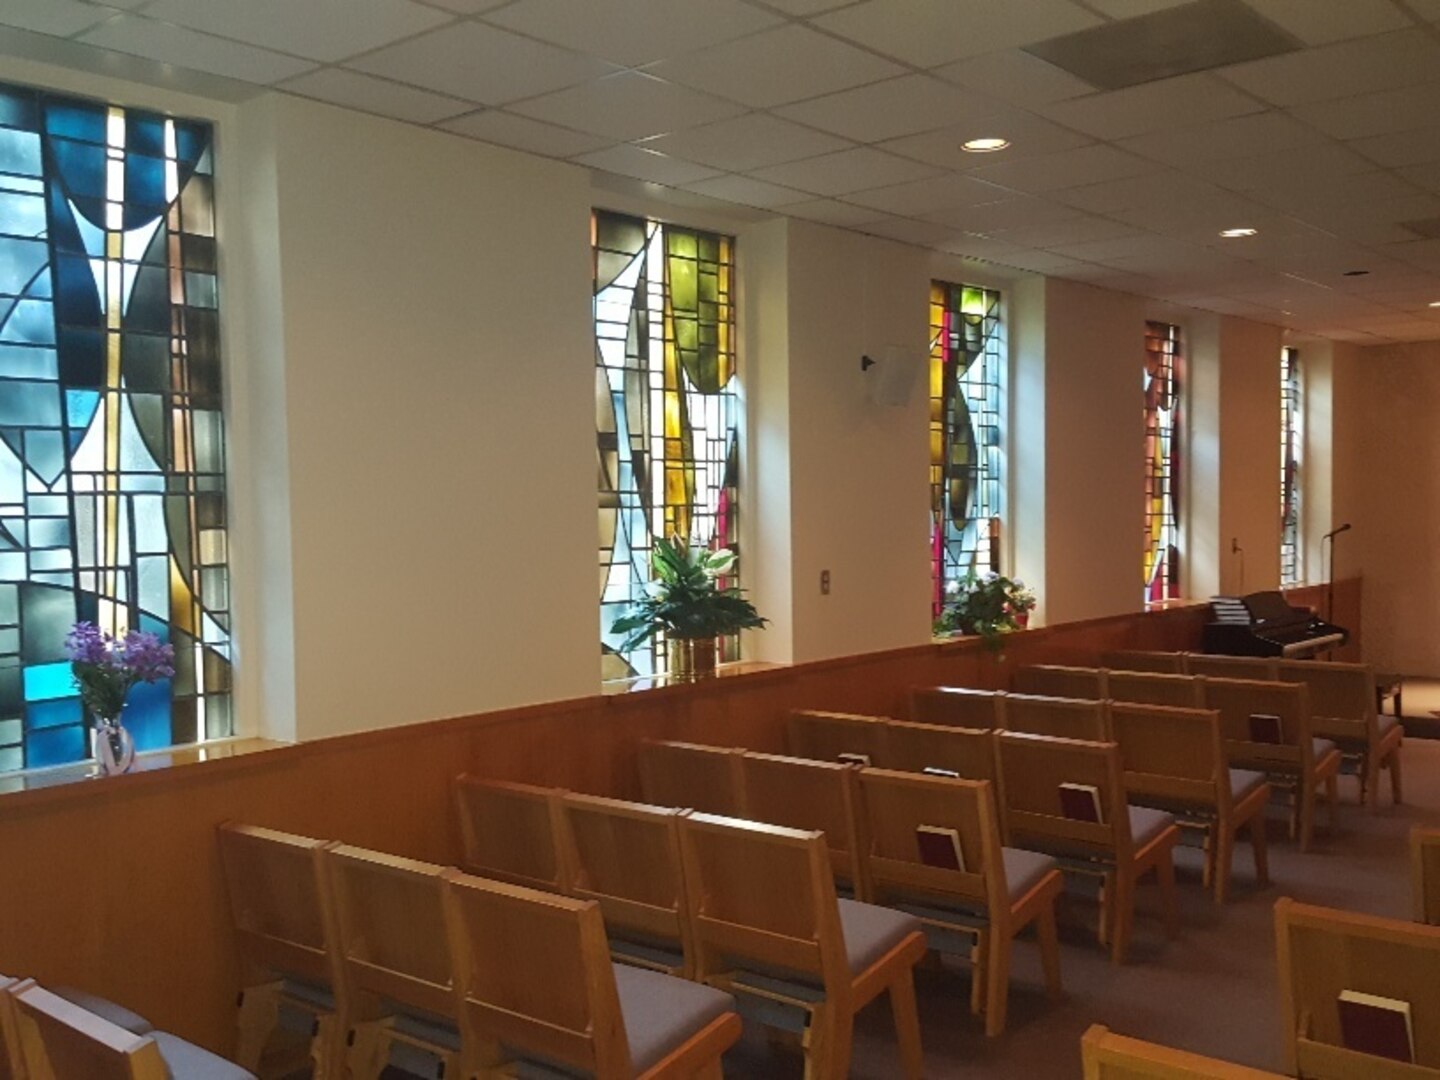 Photo of Chapel's stained glass in the former Wilford Hall Medical Center.